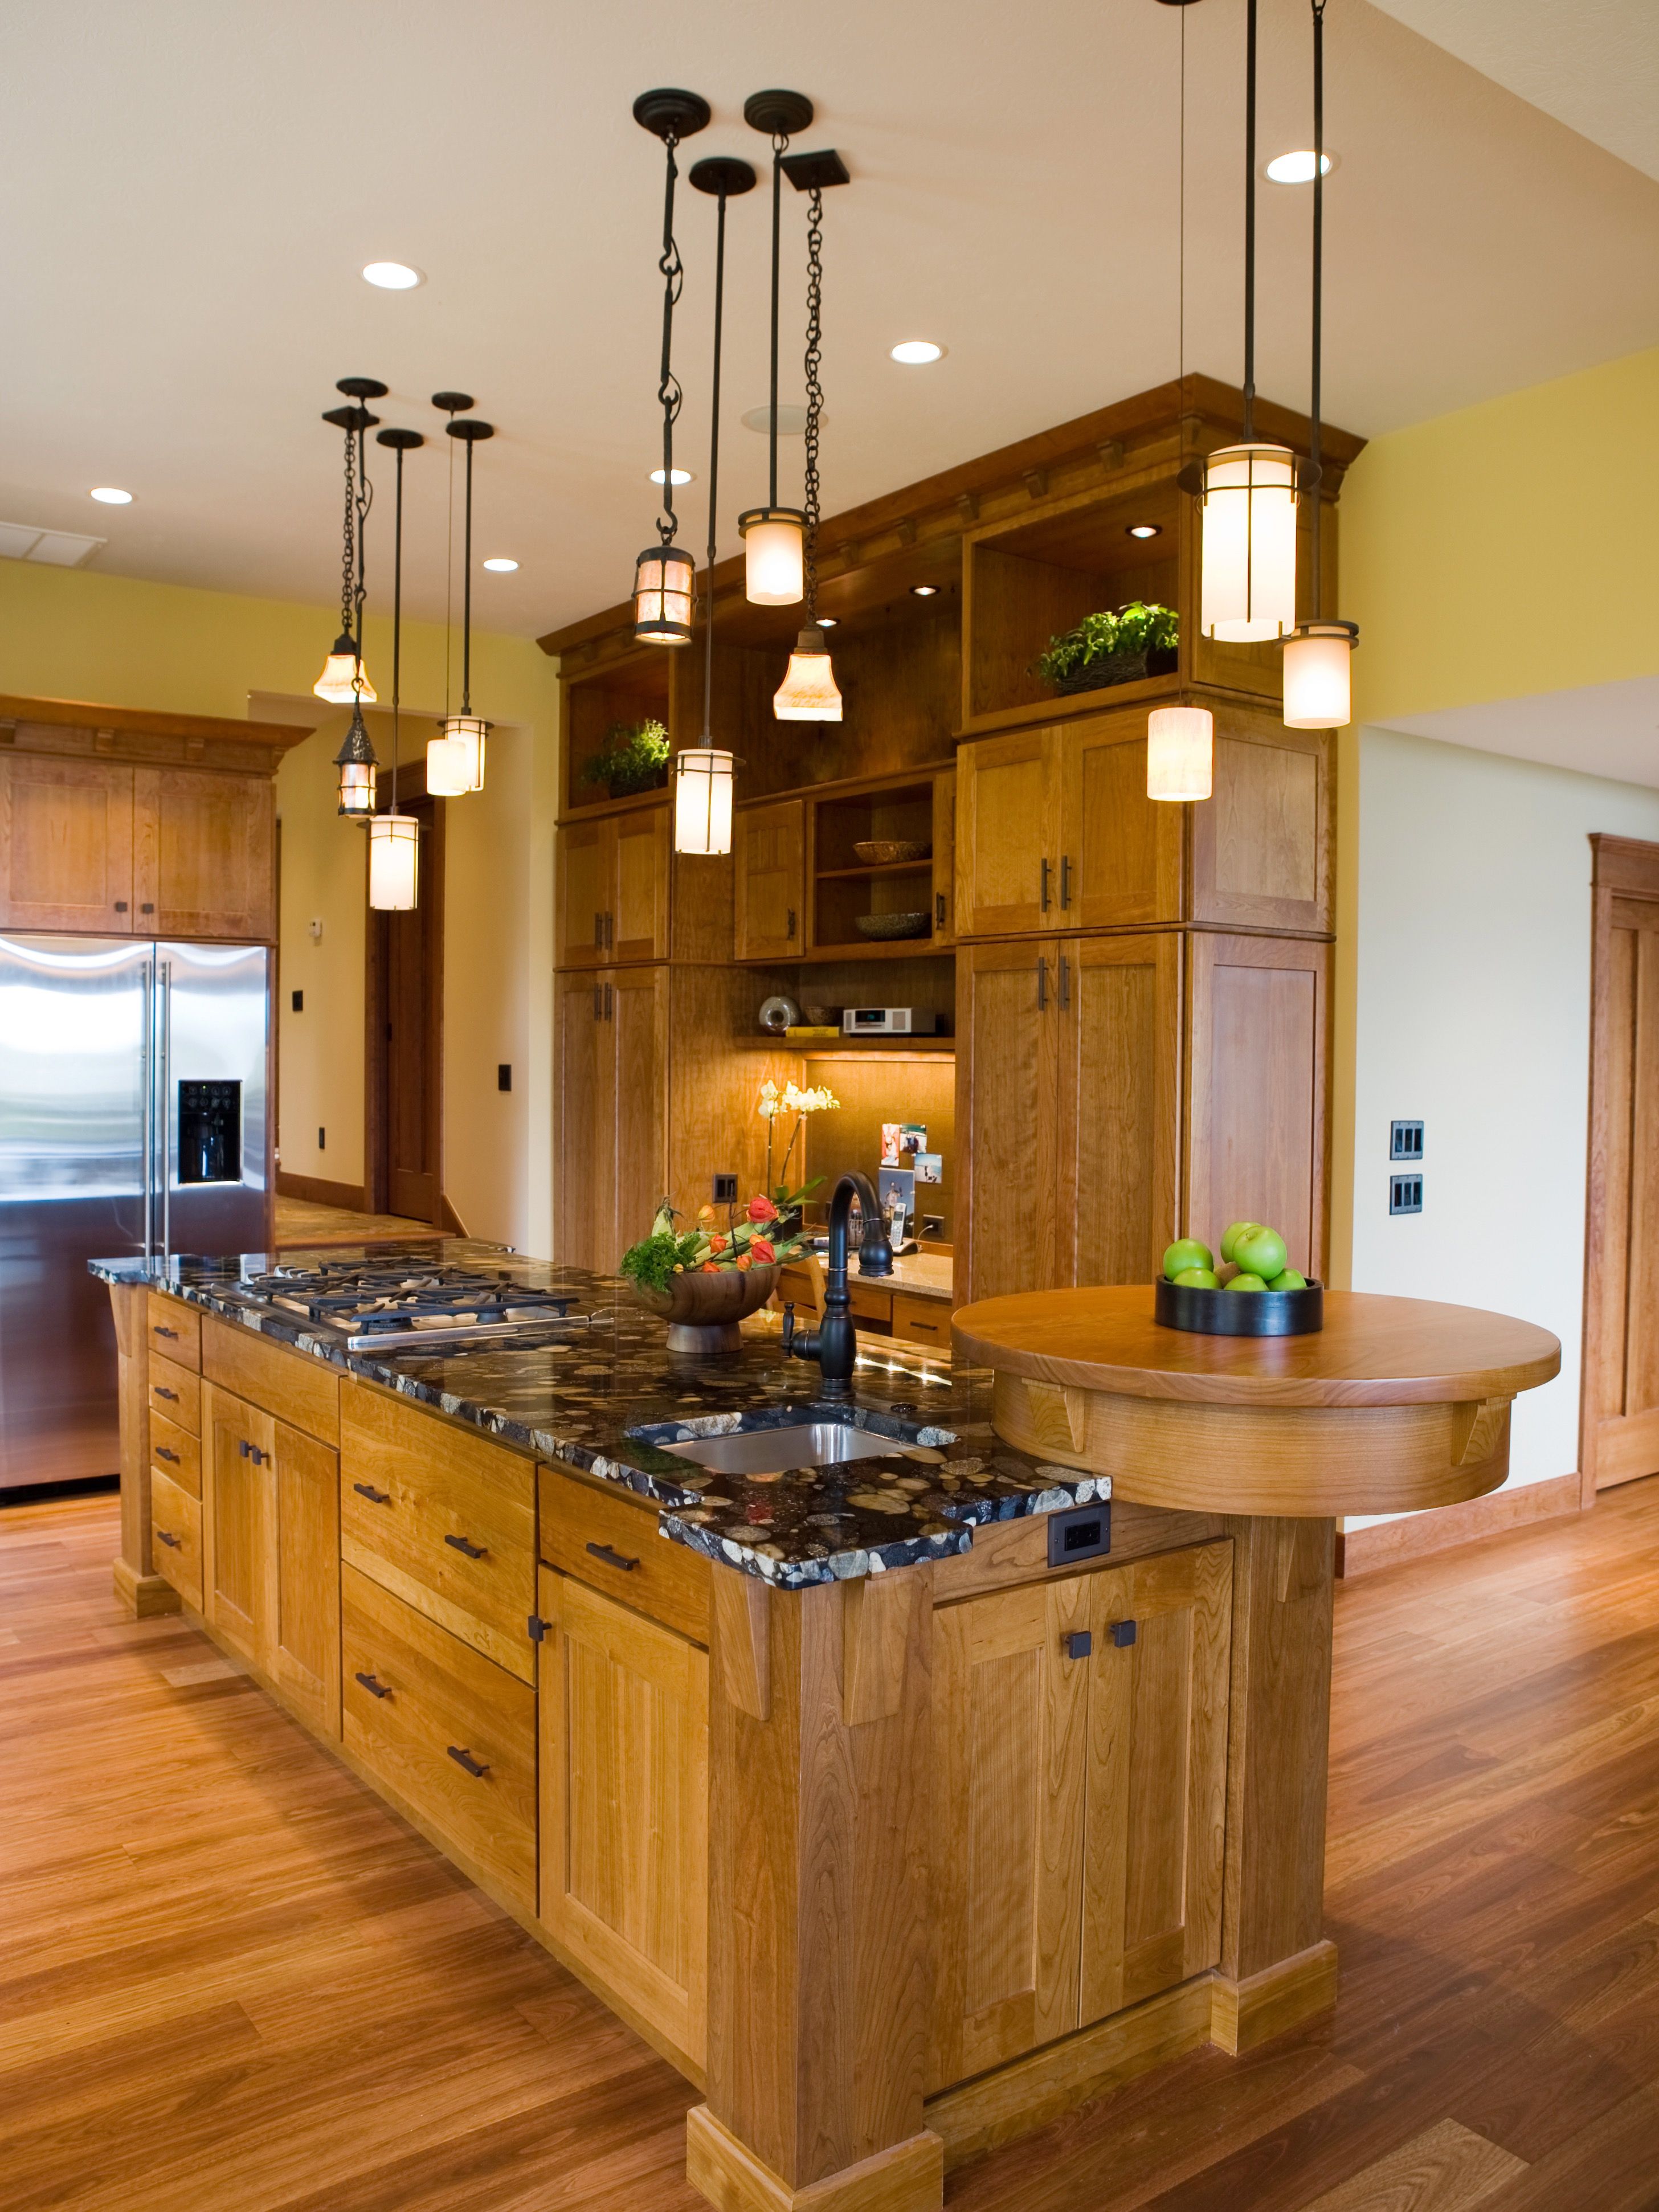 Gourmet Wooden Kitchen With Multiple Pendant Lights (View 2 of 15)